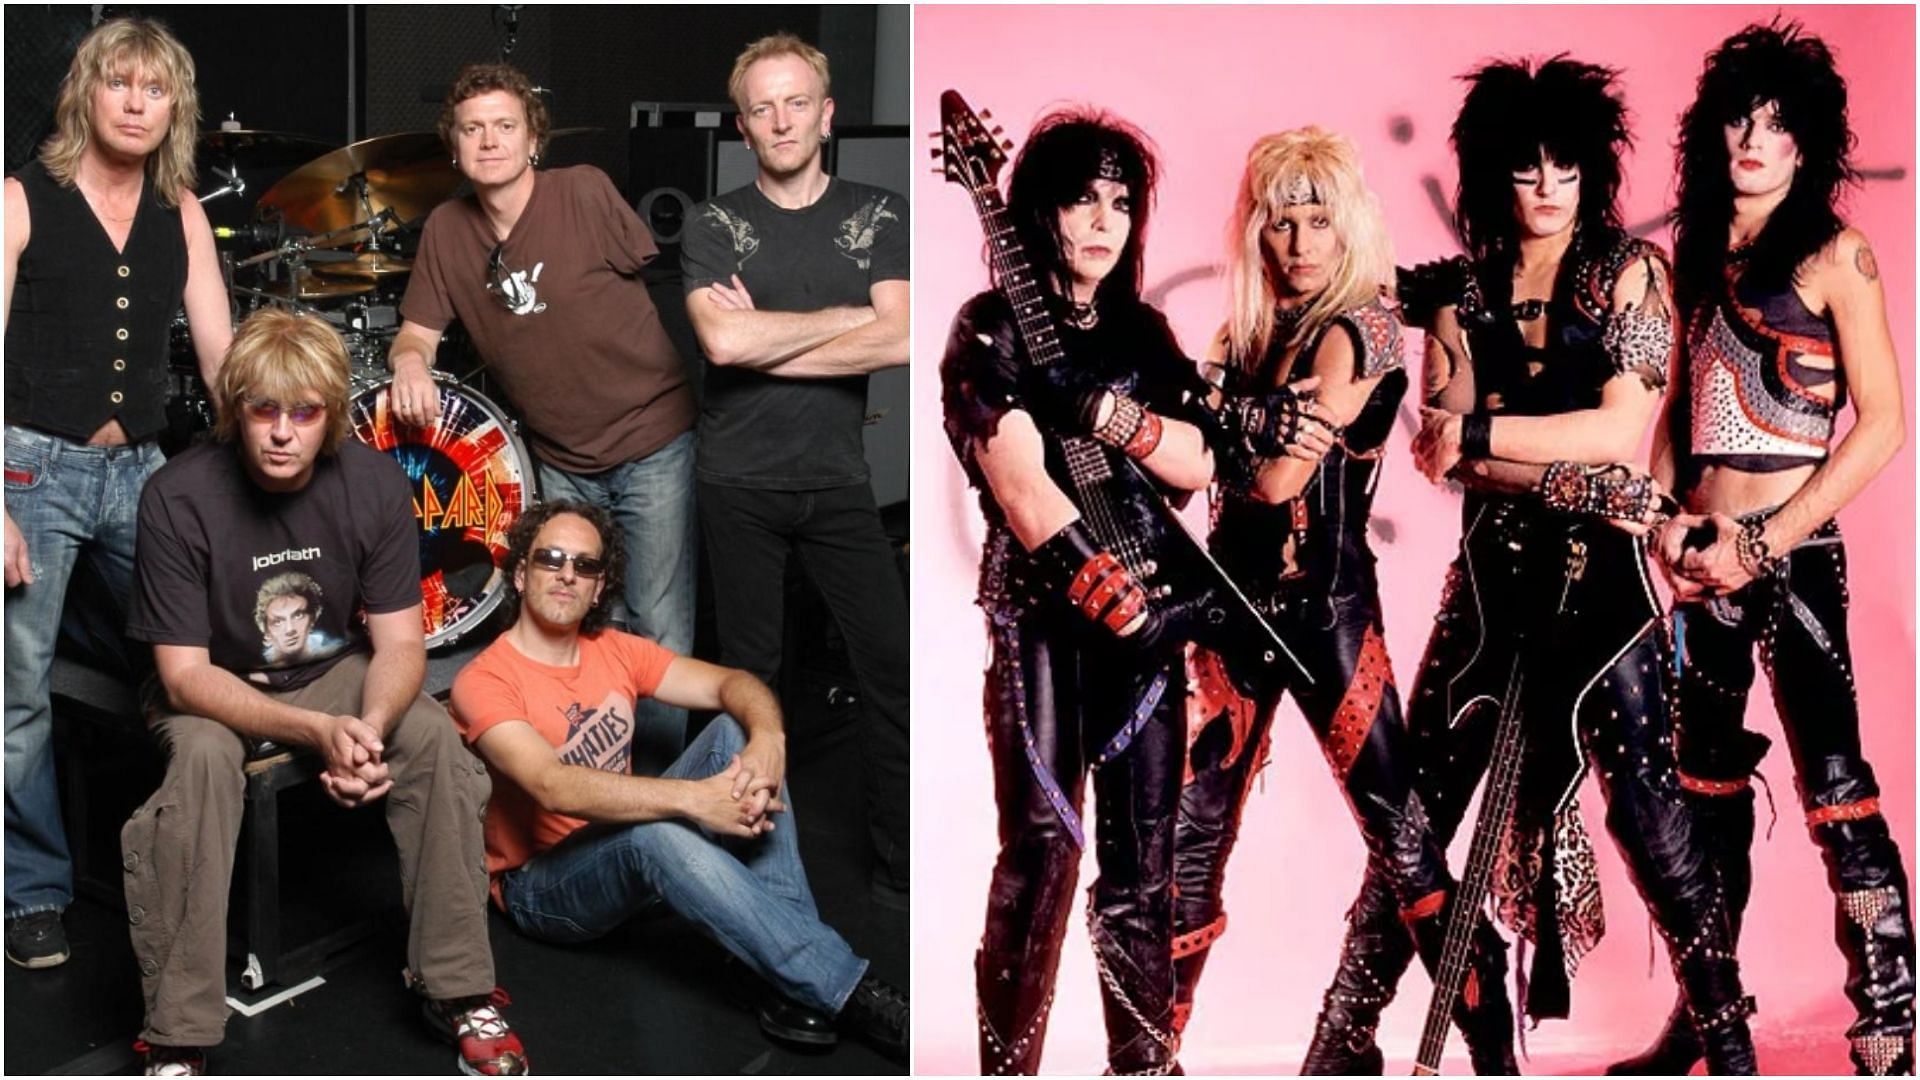 Def Leppard and Motley Crue have announced a pair of shows for Atlantic City. (Images via Getty)